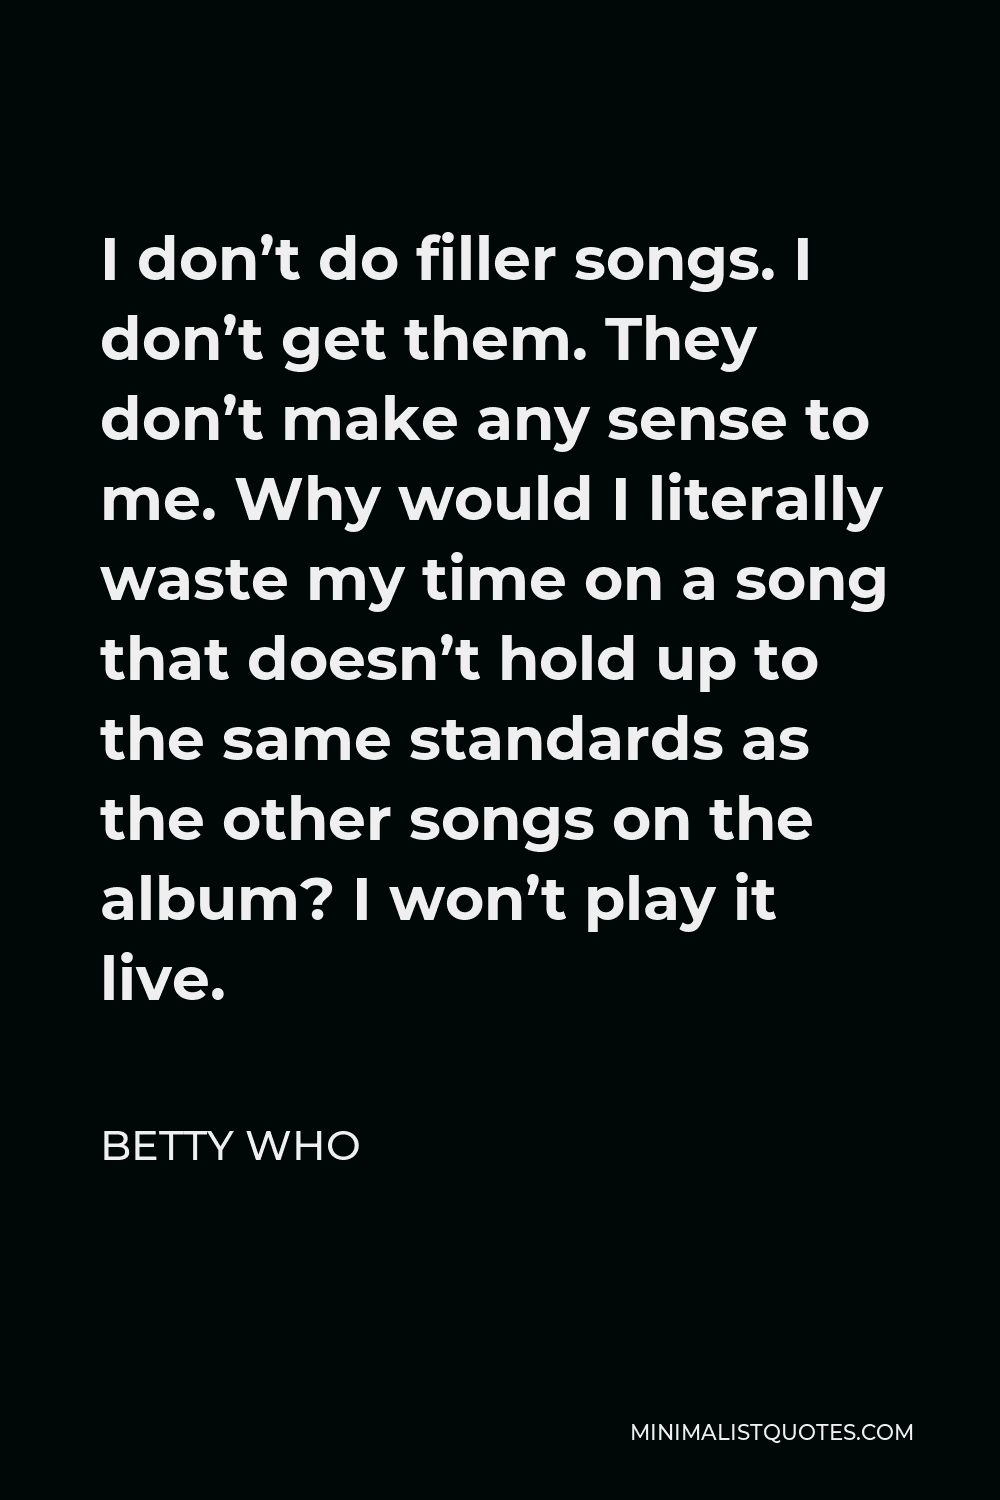 Betty Who Quote - I don’t do filler songs. I don’t get them. They don’t make any sense to me. Why would I literally waste my time on a song that doesn’t hold up to the same standards as the other songs on the album? I won’t play it live.